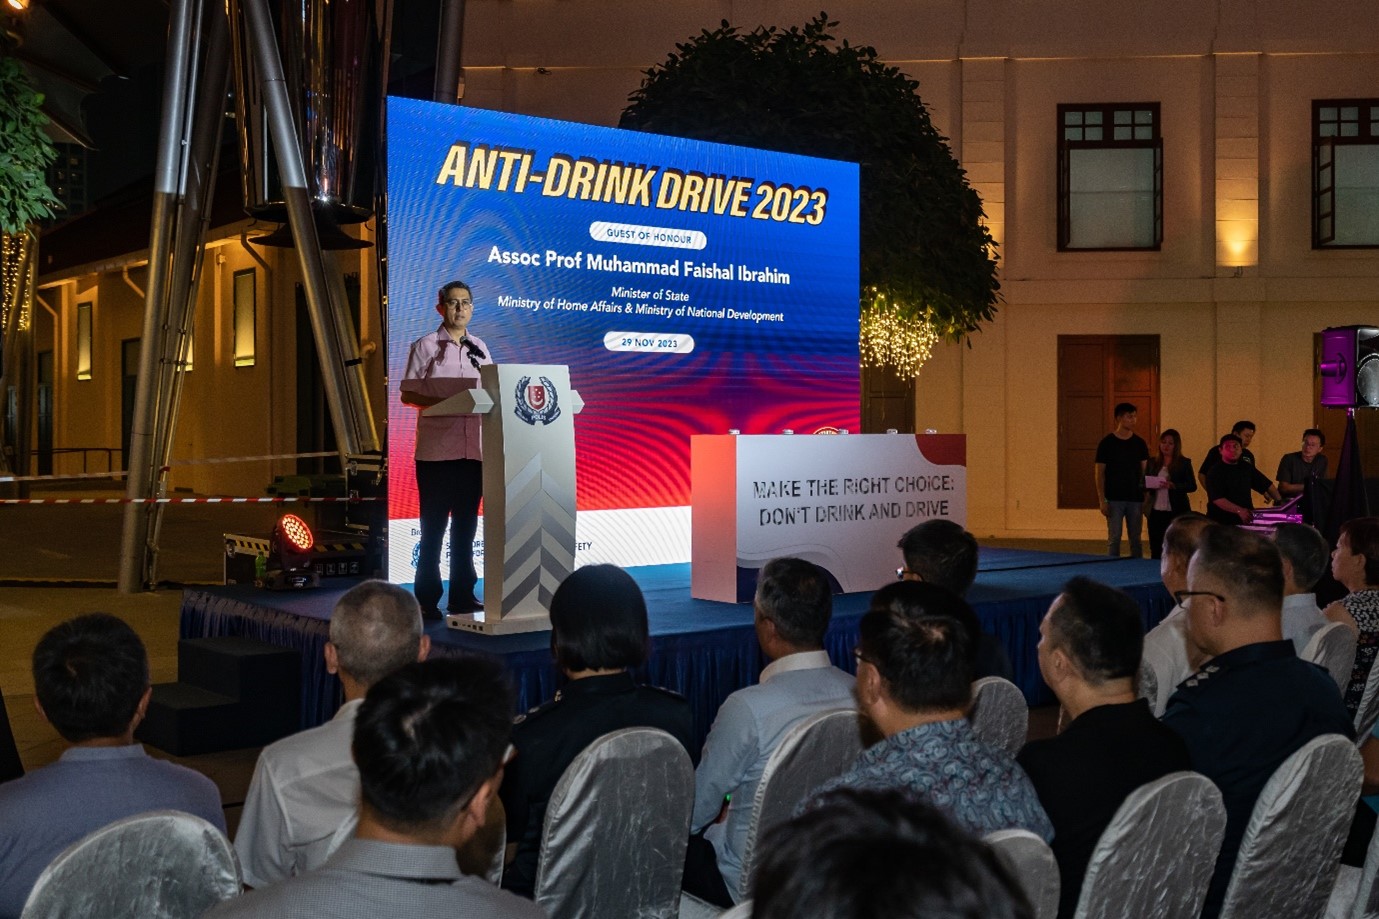 20231130_anti_drink_drive_campaign_2023_make_the_right_choice_2